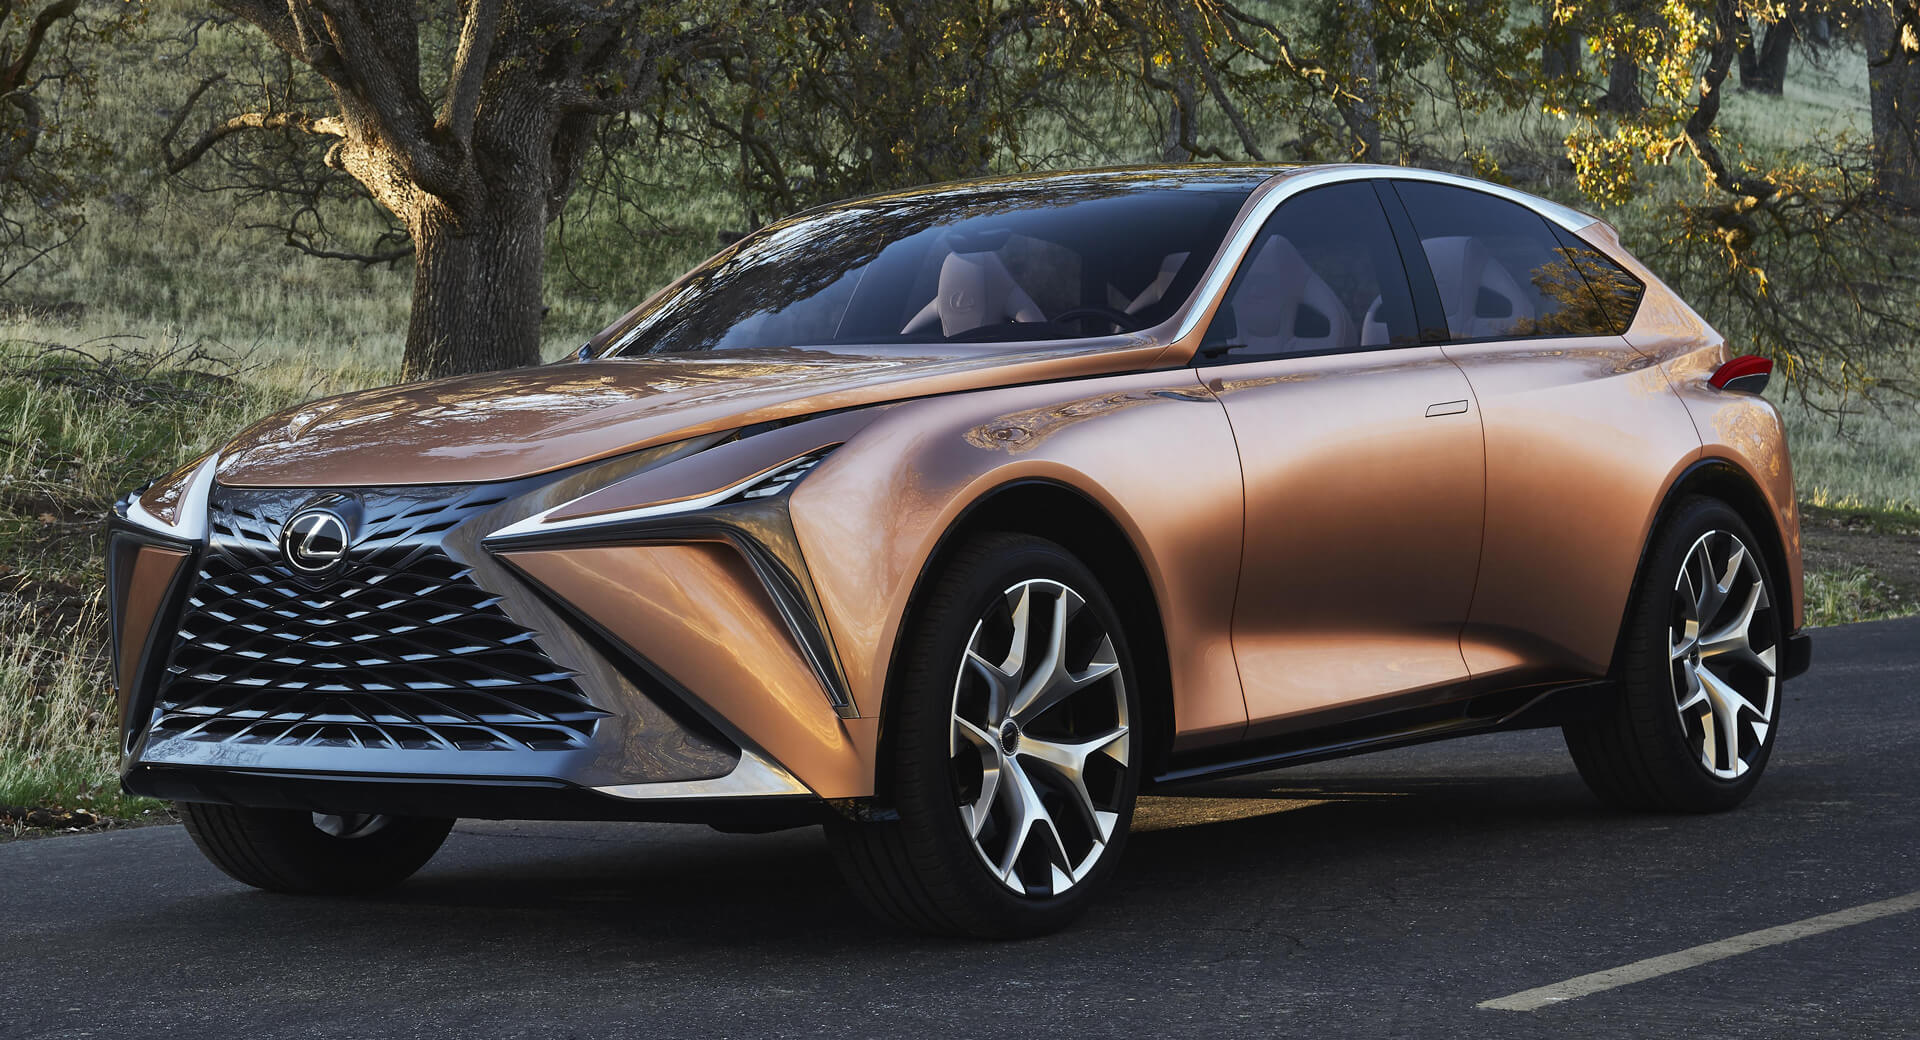 Lexus Planning New 2022 LQ Flagship SUV With LS Underpinnings | Carscoops